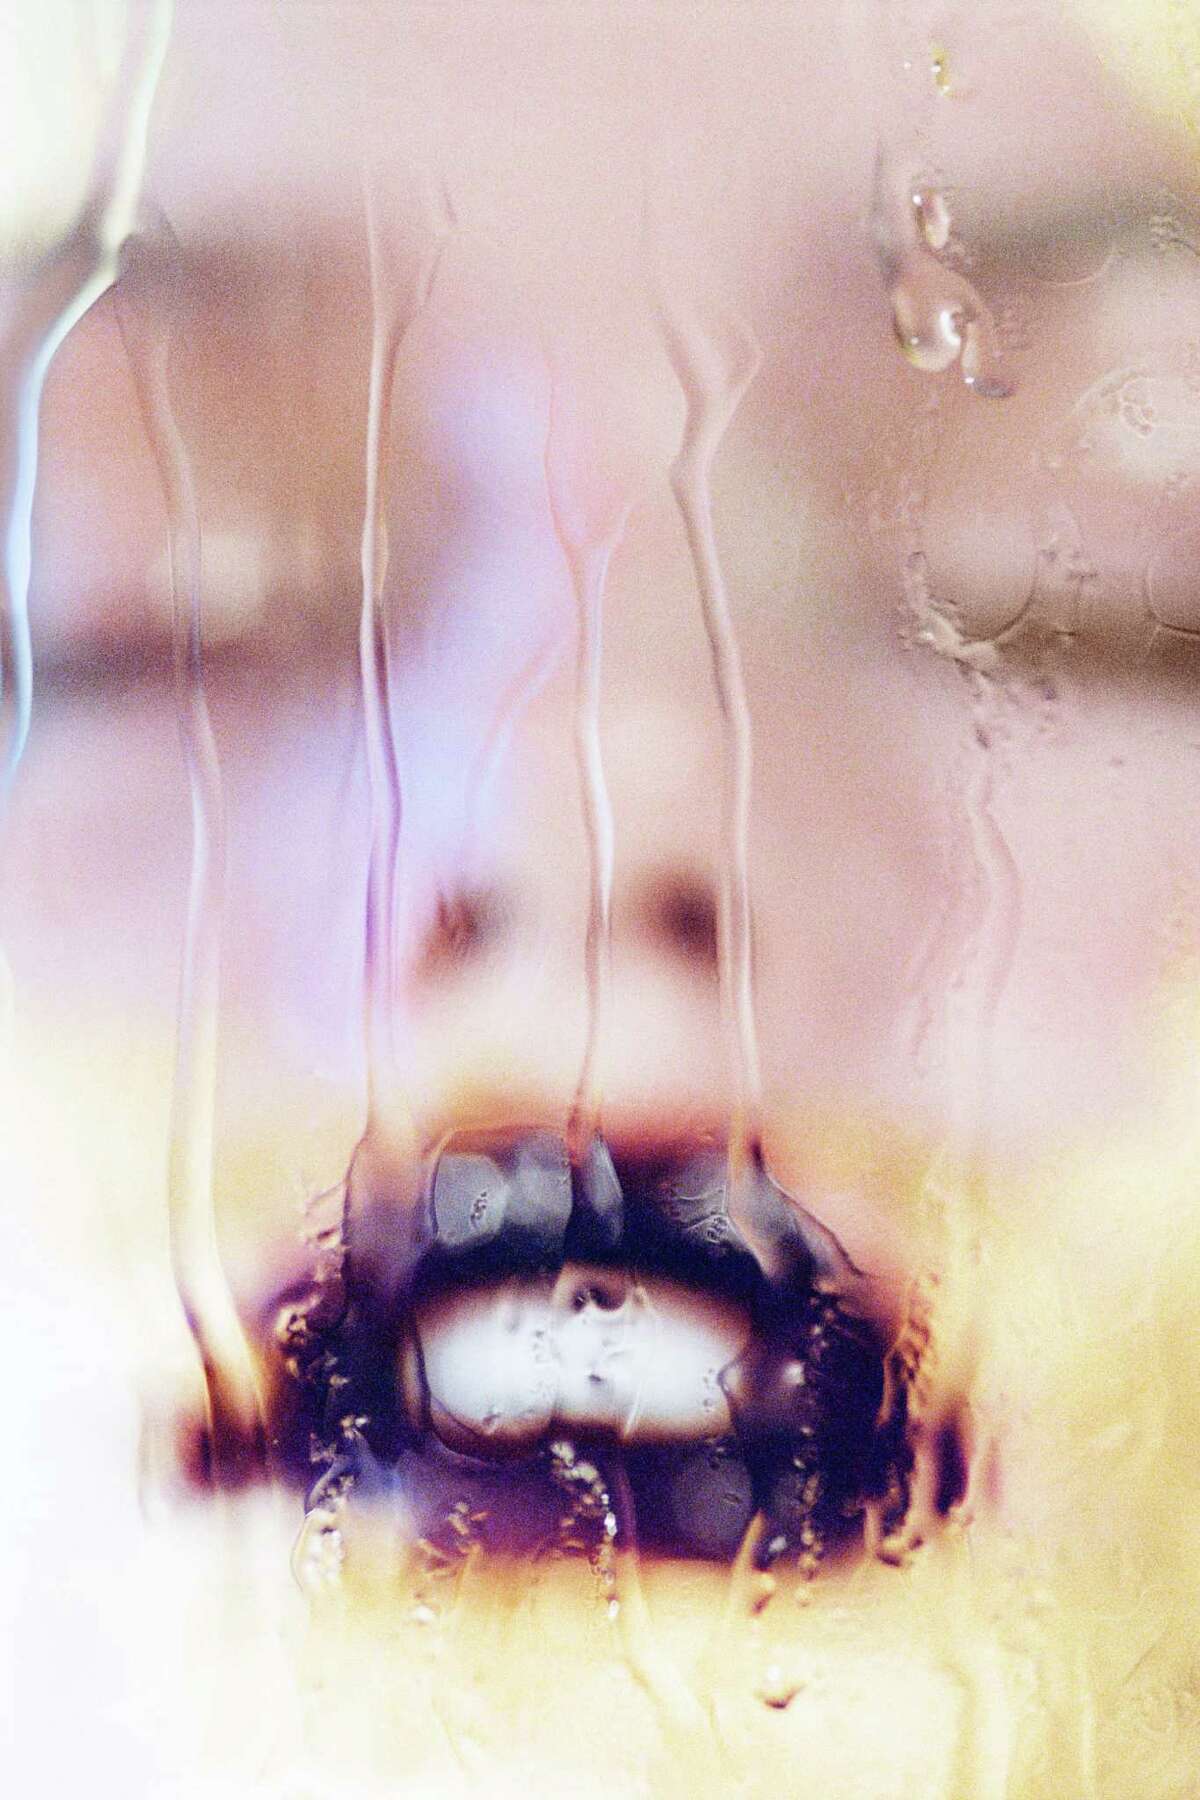 "Black Orchid," a 2012 C-print, is among works on view in "Marilyn Minter: Pretty/Dirty" at the Contemporary Arts Museum, Houston through Aug. 2. (86 x 57 inches; Courtesy of the artist, Salon 94, New York, and Regen Projects, Los Angeles) name 4,